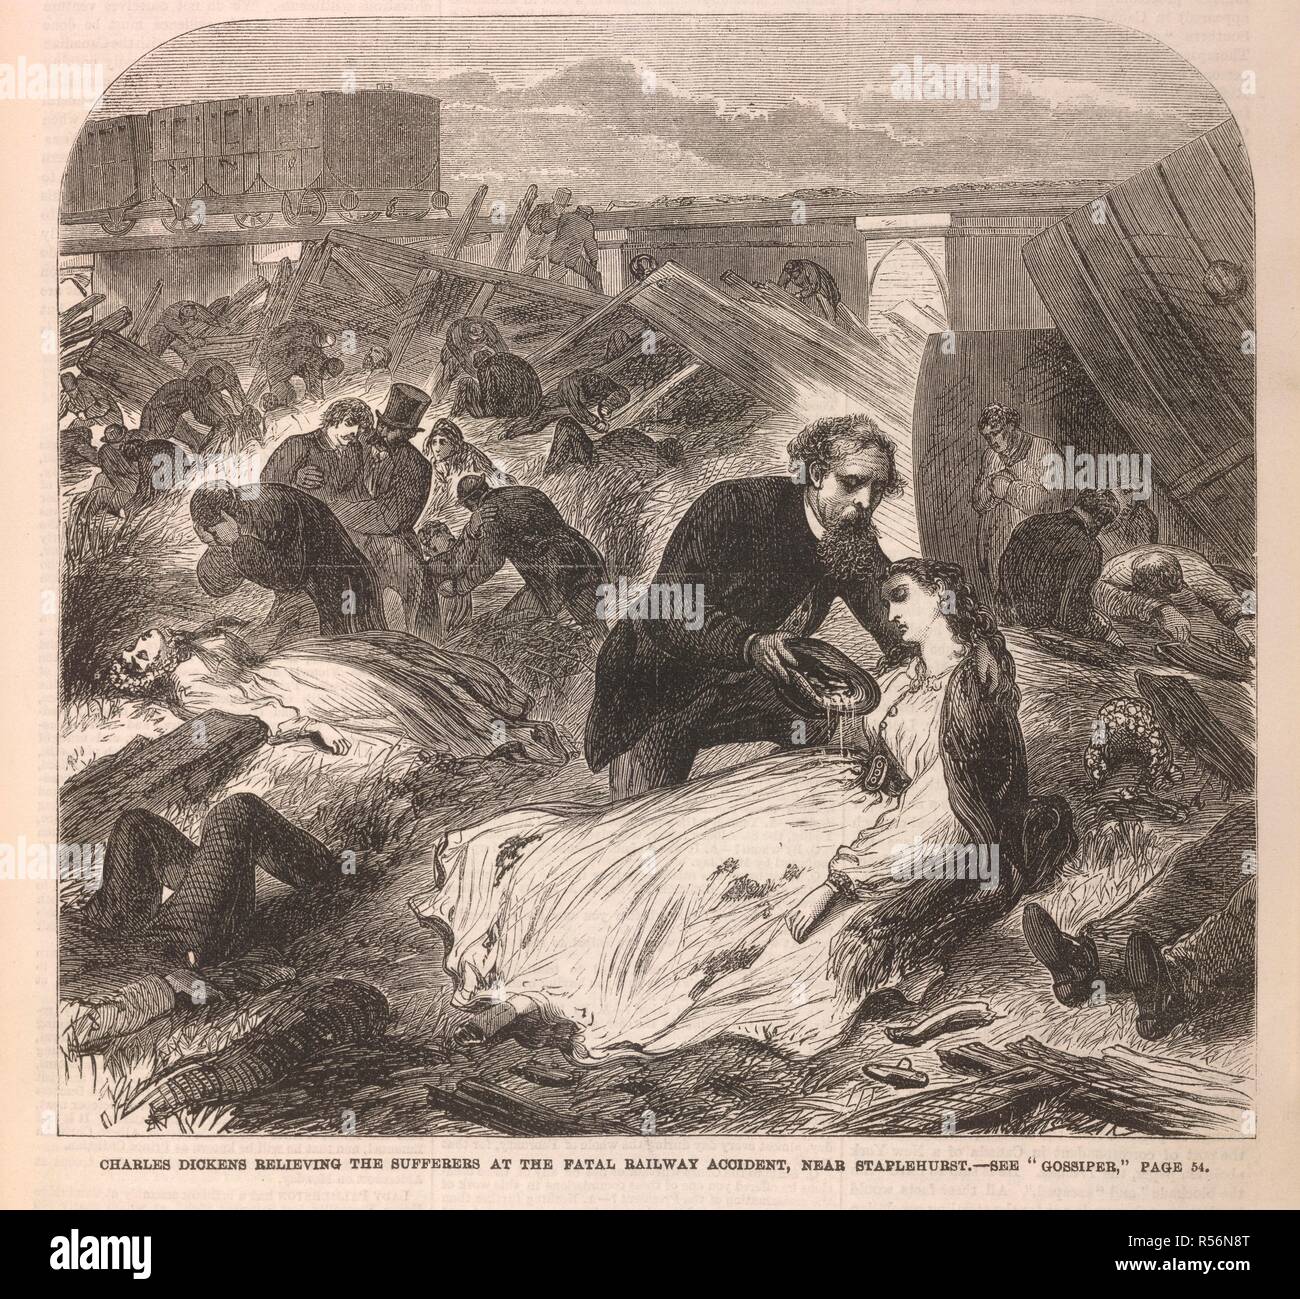 Charles Dickens relieving the sufferers at the fatal railway accident, near Staplehurst'. The Staplehurst rail crash was a derailment at Staplehurst, Kent on 9 June 1865 at 3:13 pm. The South Eastern Railway Folkestone to London boat train derailed while crossing a viaduct where a length of track had been removed during engineering works, killing ten passengers and injuring forty. Charles Dickens was travelling with Ellen Ternan and her mother on the train; they all survived the derailment. He tended the victims, some of whom died while he was with them. The experience affected Dickens greatly Stock Photo